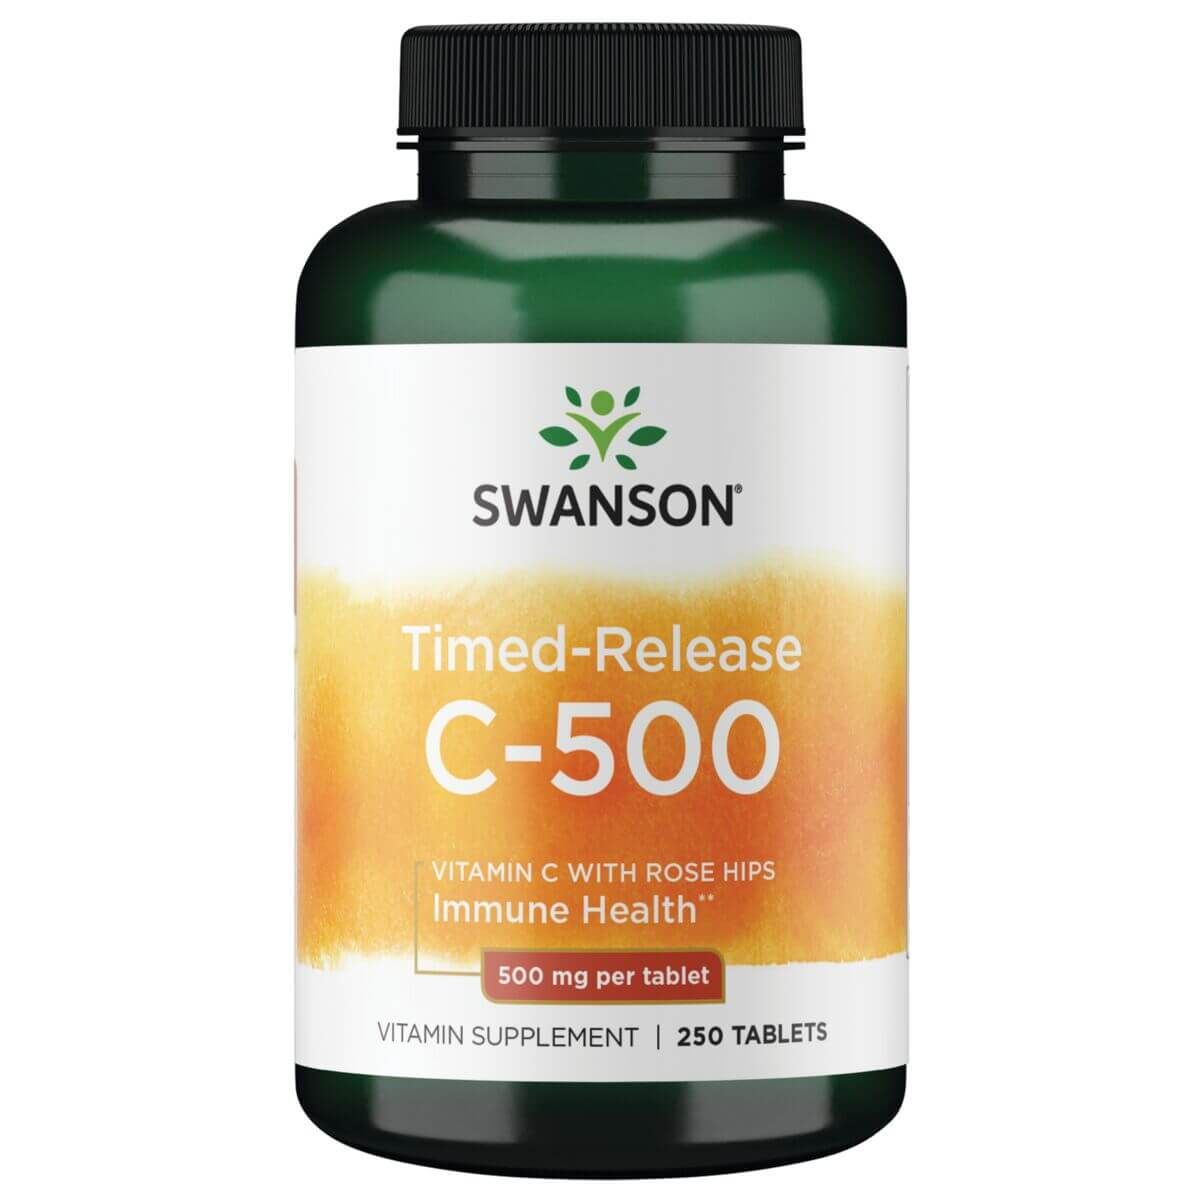 Photos - Vitamins & Minerals Swanson Vitamin C with Rose Hips Timed-Release 500mg 250 Tablets PBW-P3200 